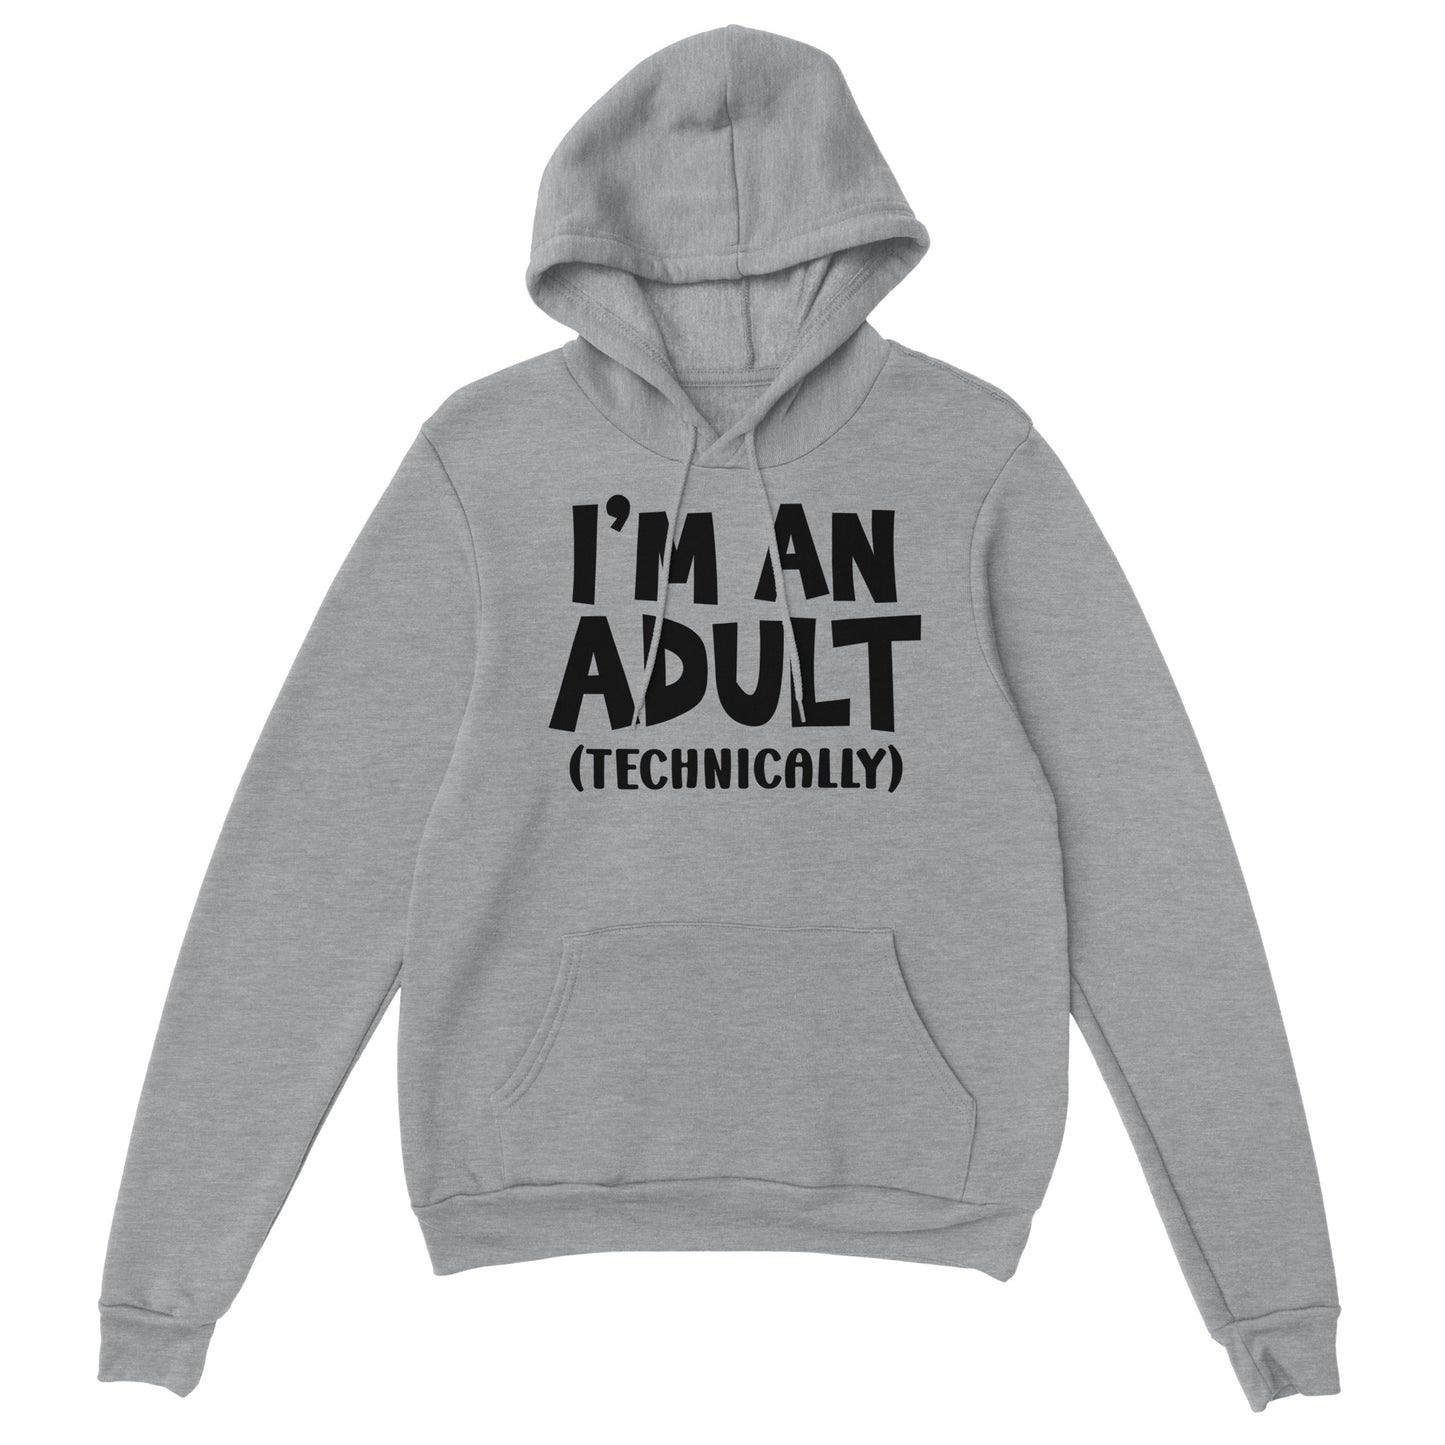 I'm An Adult (Technically) Pullover Hoodie - Mister Snarky's